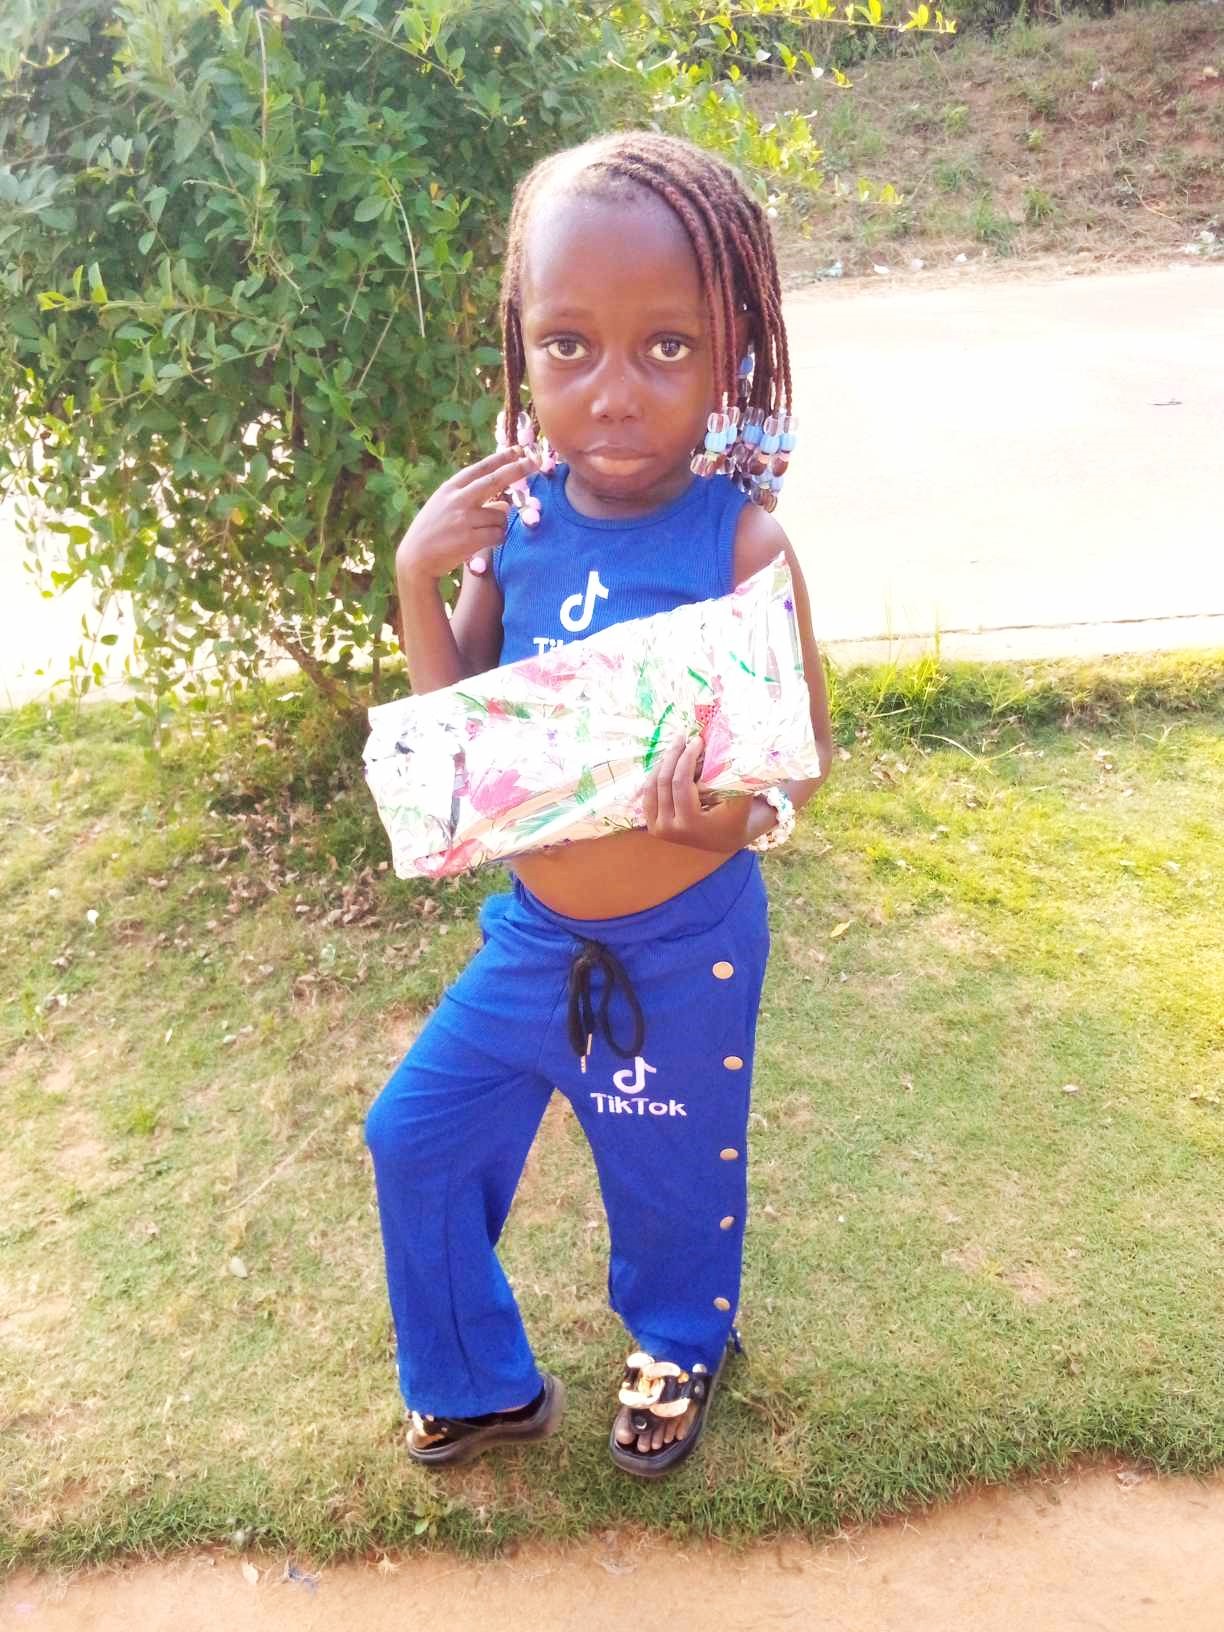 Destiny is excited to open her gift. She lives with Dapae and Rita.